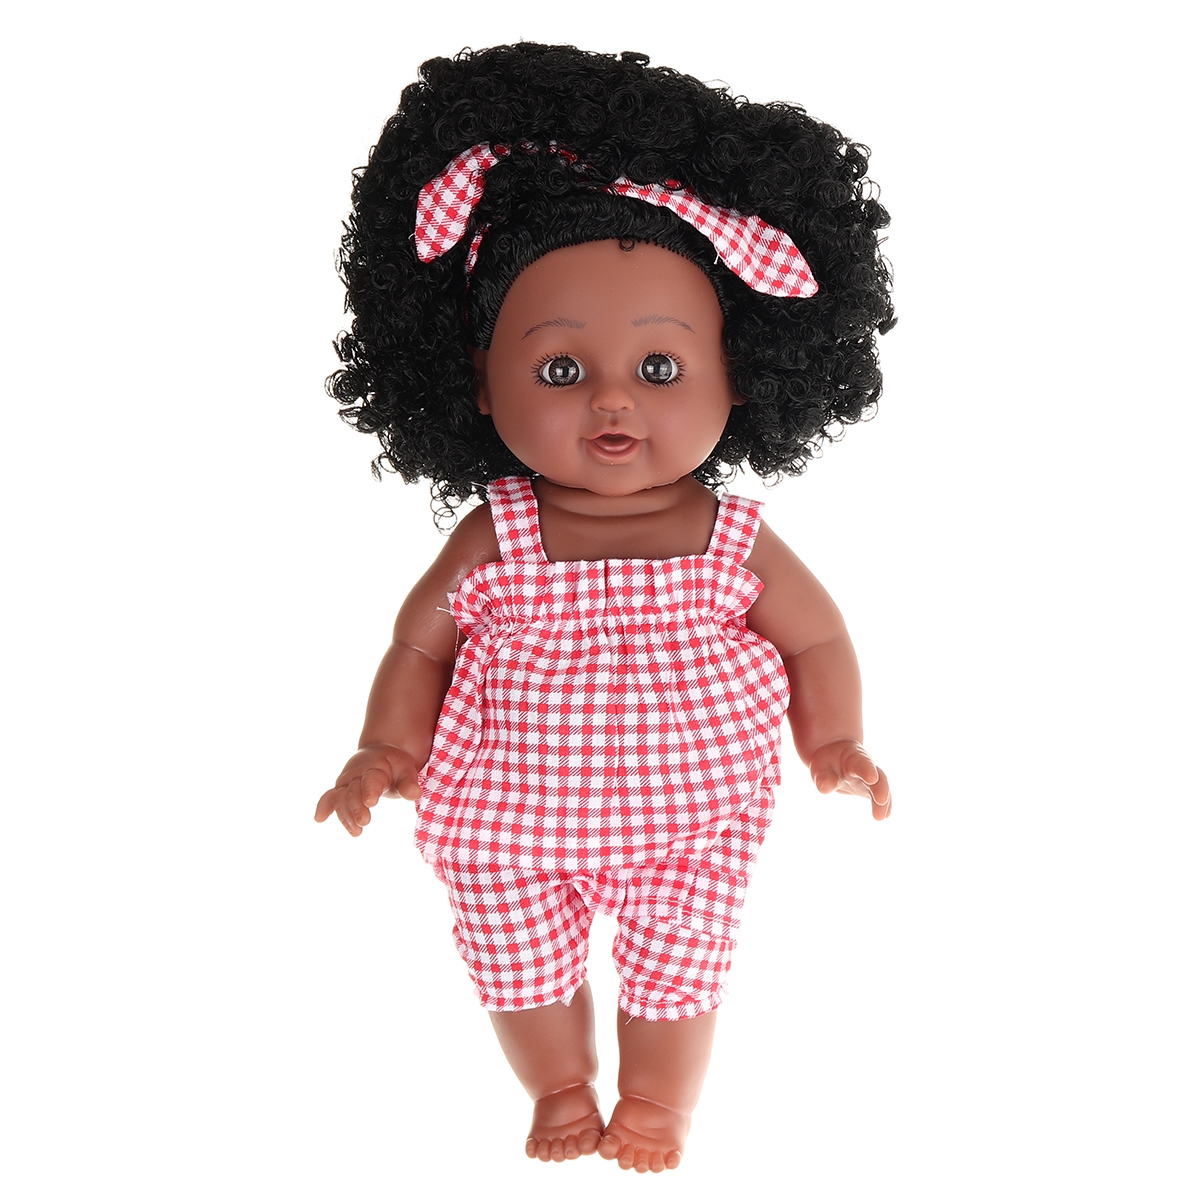 12Inch Soft Silicone Vinyl PVC Black Baby Fashion Doll Rotate 360° African Girl Perfect Reborn Doll Toy for Birthday Gift